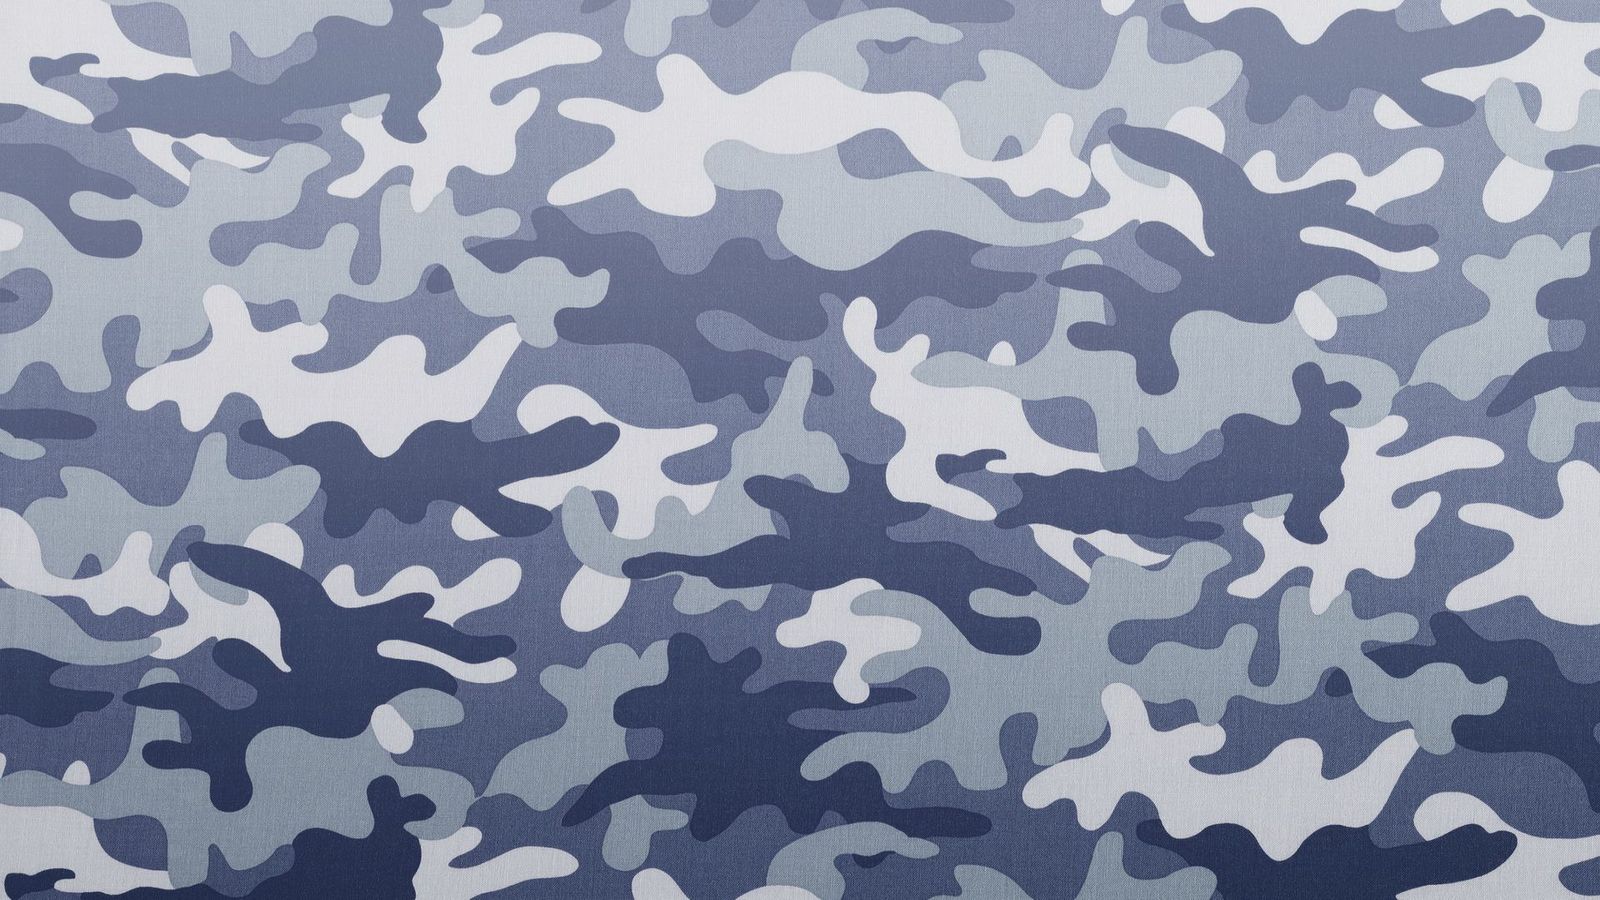 Camouflage Full HD Background Picture Image